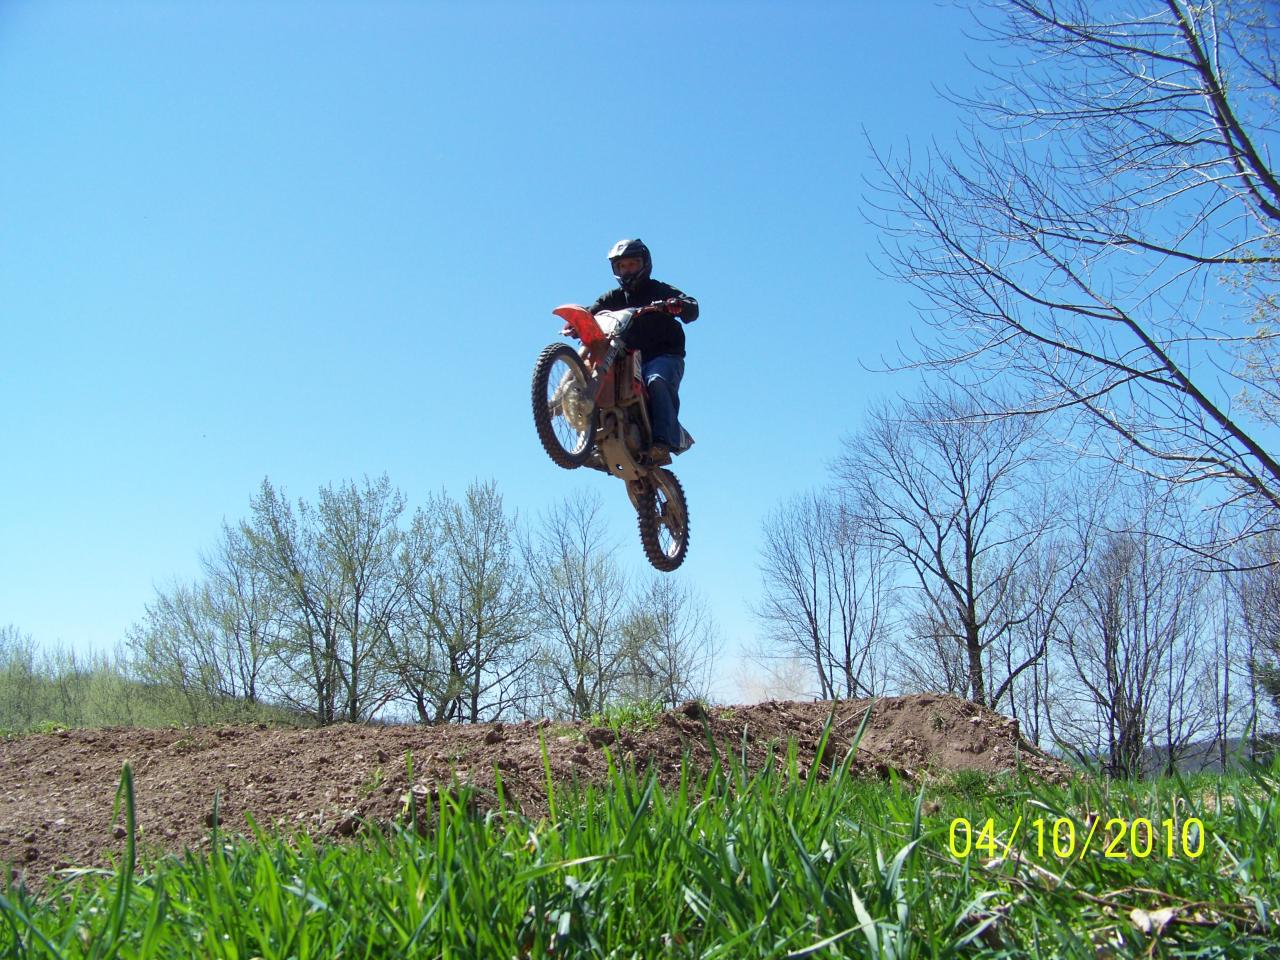 Catching air on my 01 CR125..current